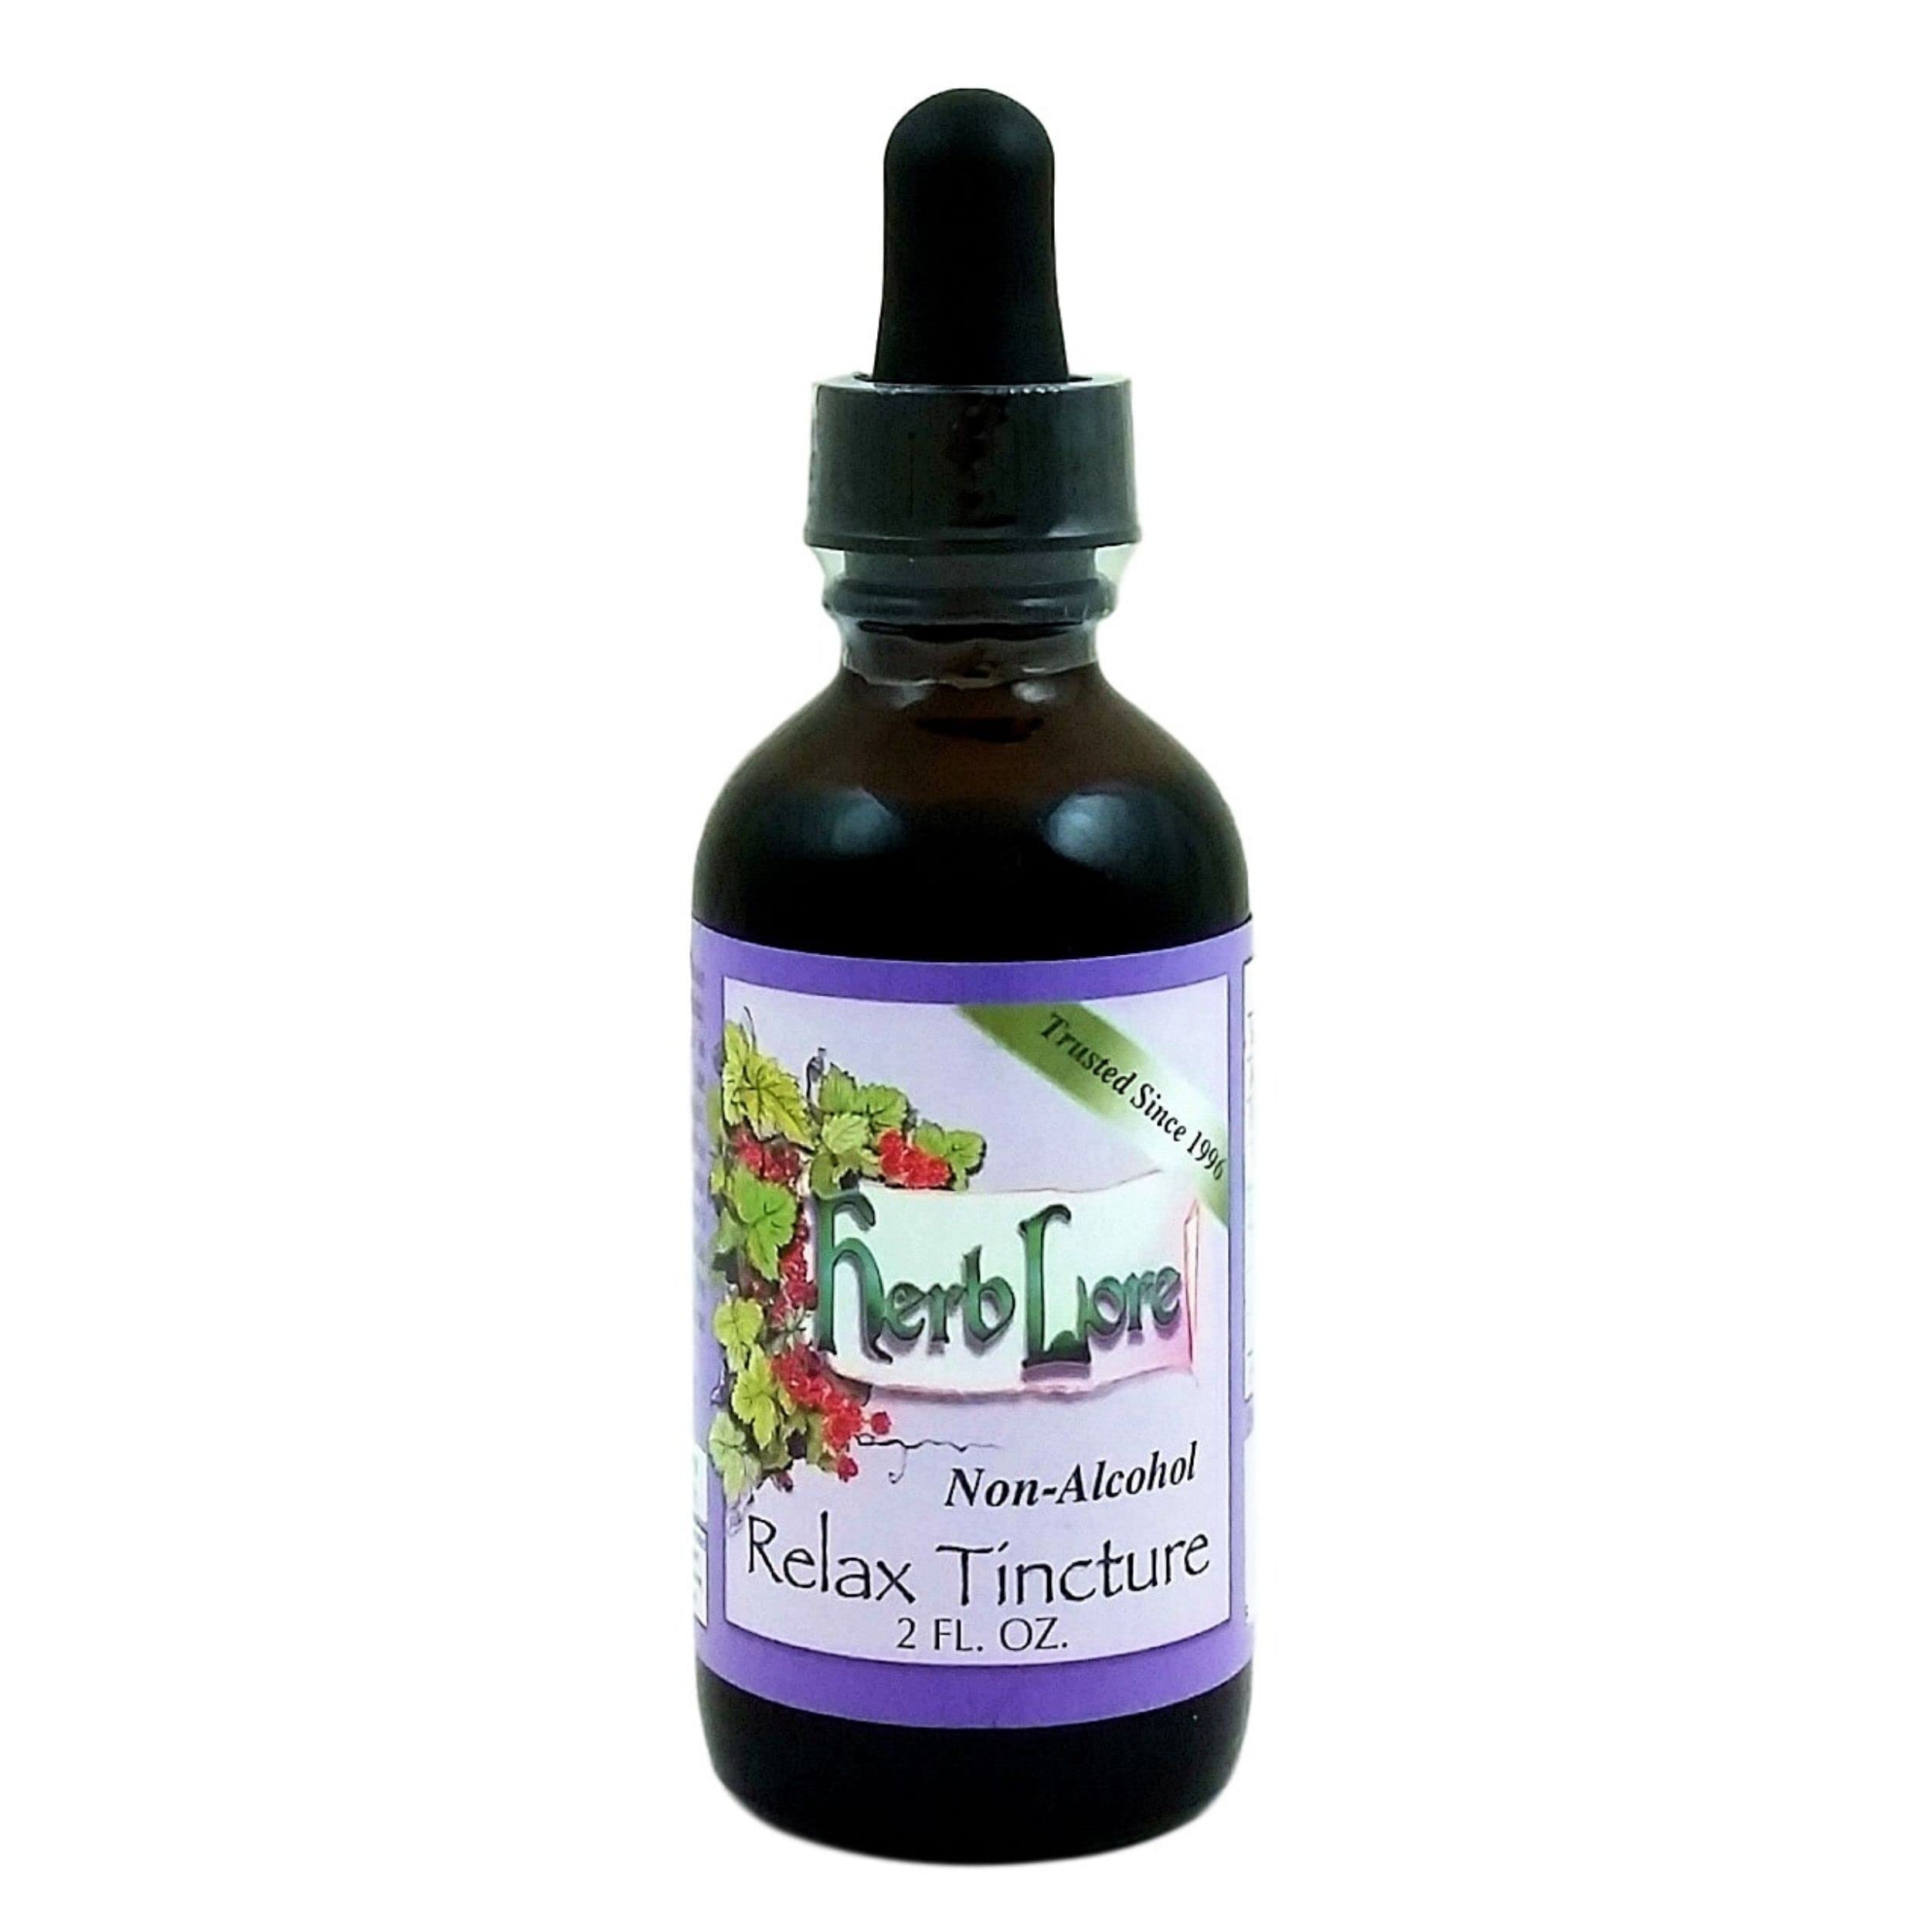 Herb Lore Relax Tincture 2 fl oz Non Alcohol - Liquid Drops with Lemon Balm, Chamomile & Skullcap to Calm, Soothe & Relax The Body & Mind for Kids & Adults